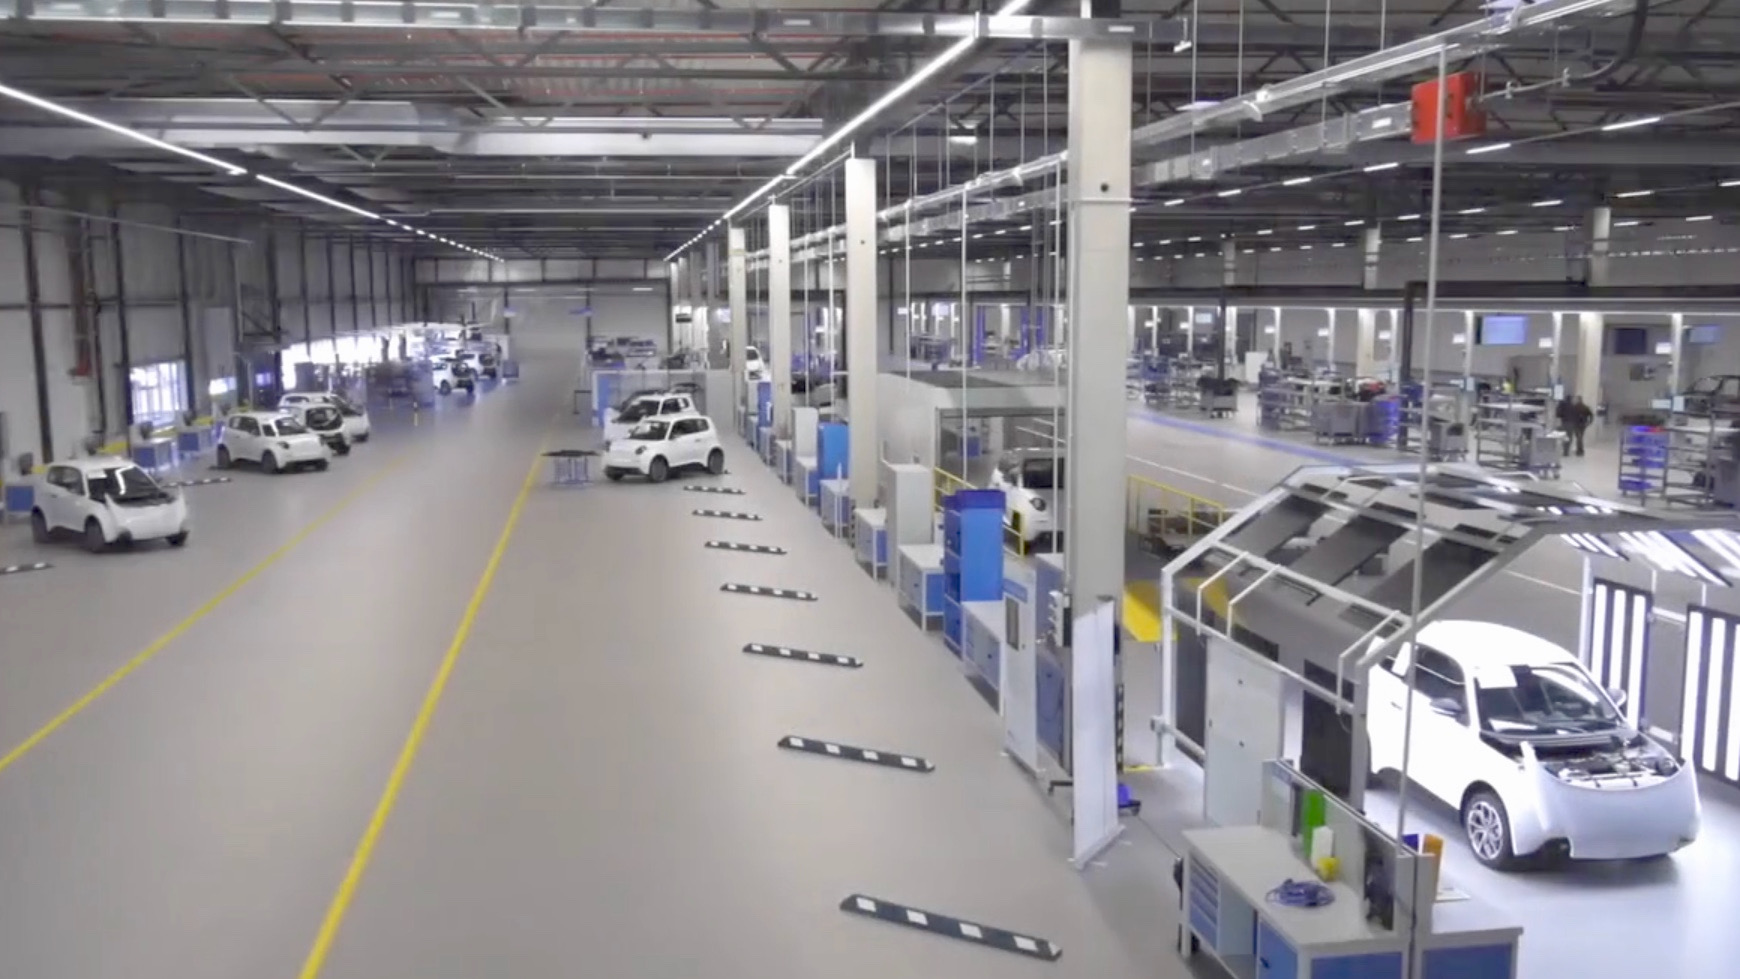 A look inside the production hall of the Aachen-based e-mobility start-up e.Go Mobile. CEO Prof. Dr. Günther Schuh presents the manufacturing strategy.